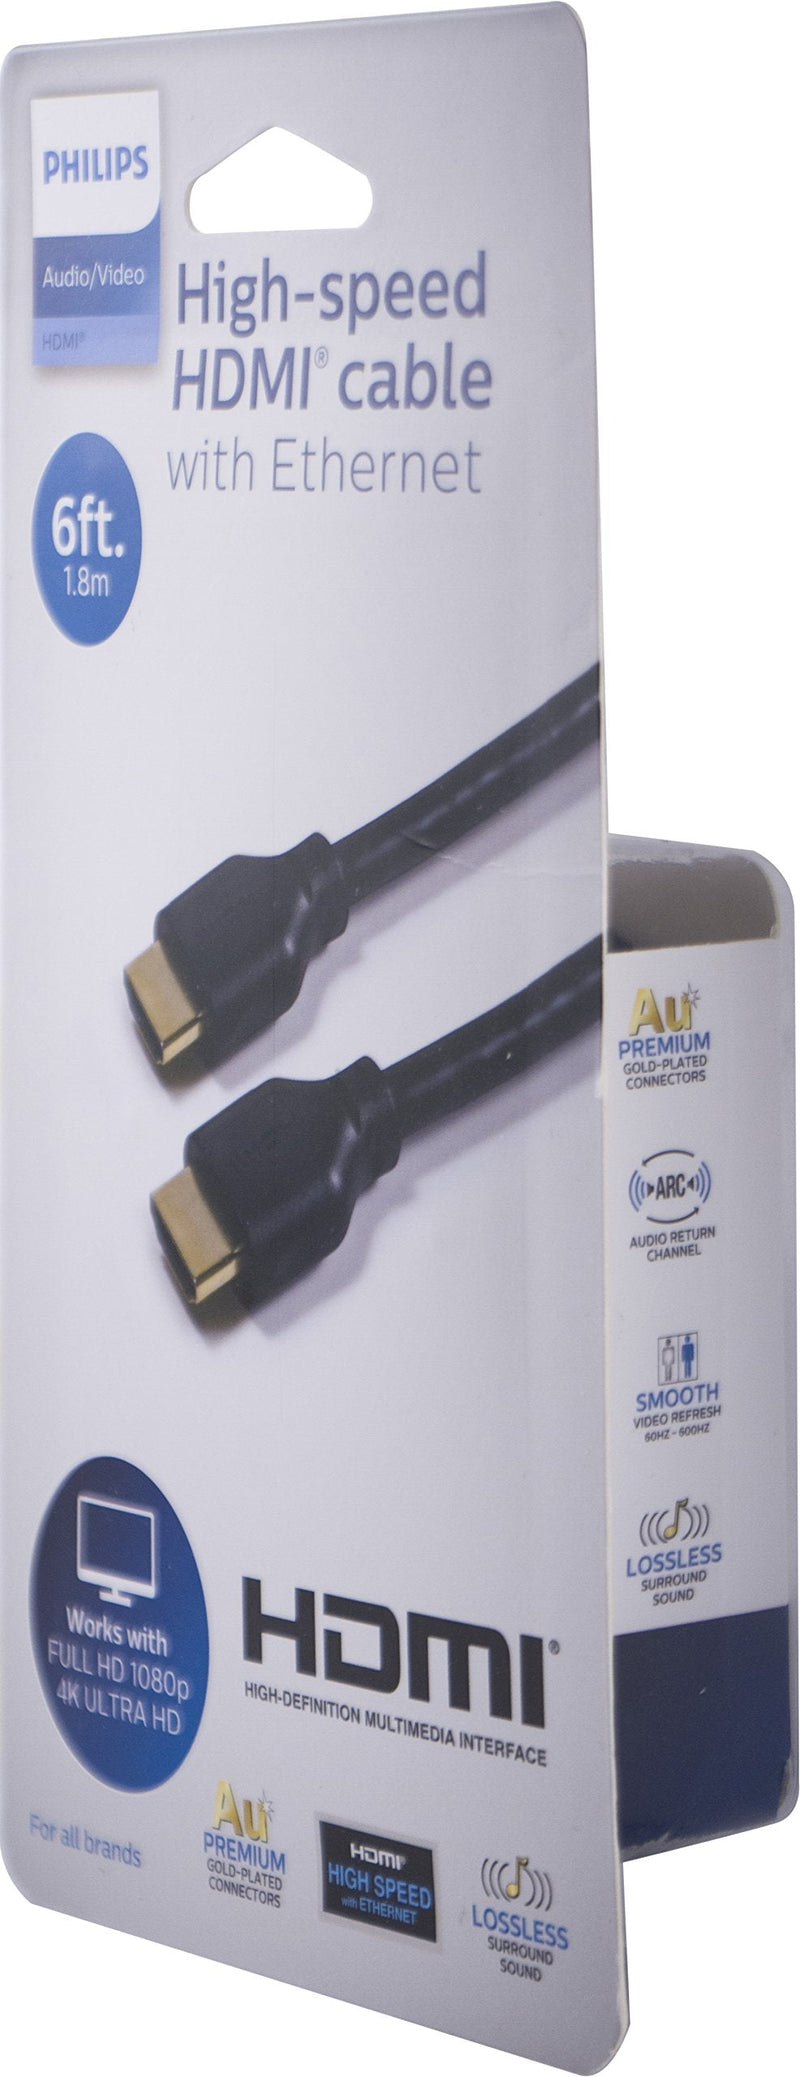 Philips 4K High-Speed HDMI Ethernet Cable 6ft (1.8m), Supports 4K Ultra HD, Full 1080P HDTV, Ethernet & ARC (Audio Return Channel), Au Premium Gold-Plated Connectors, Black, SWV2432H/37